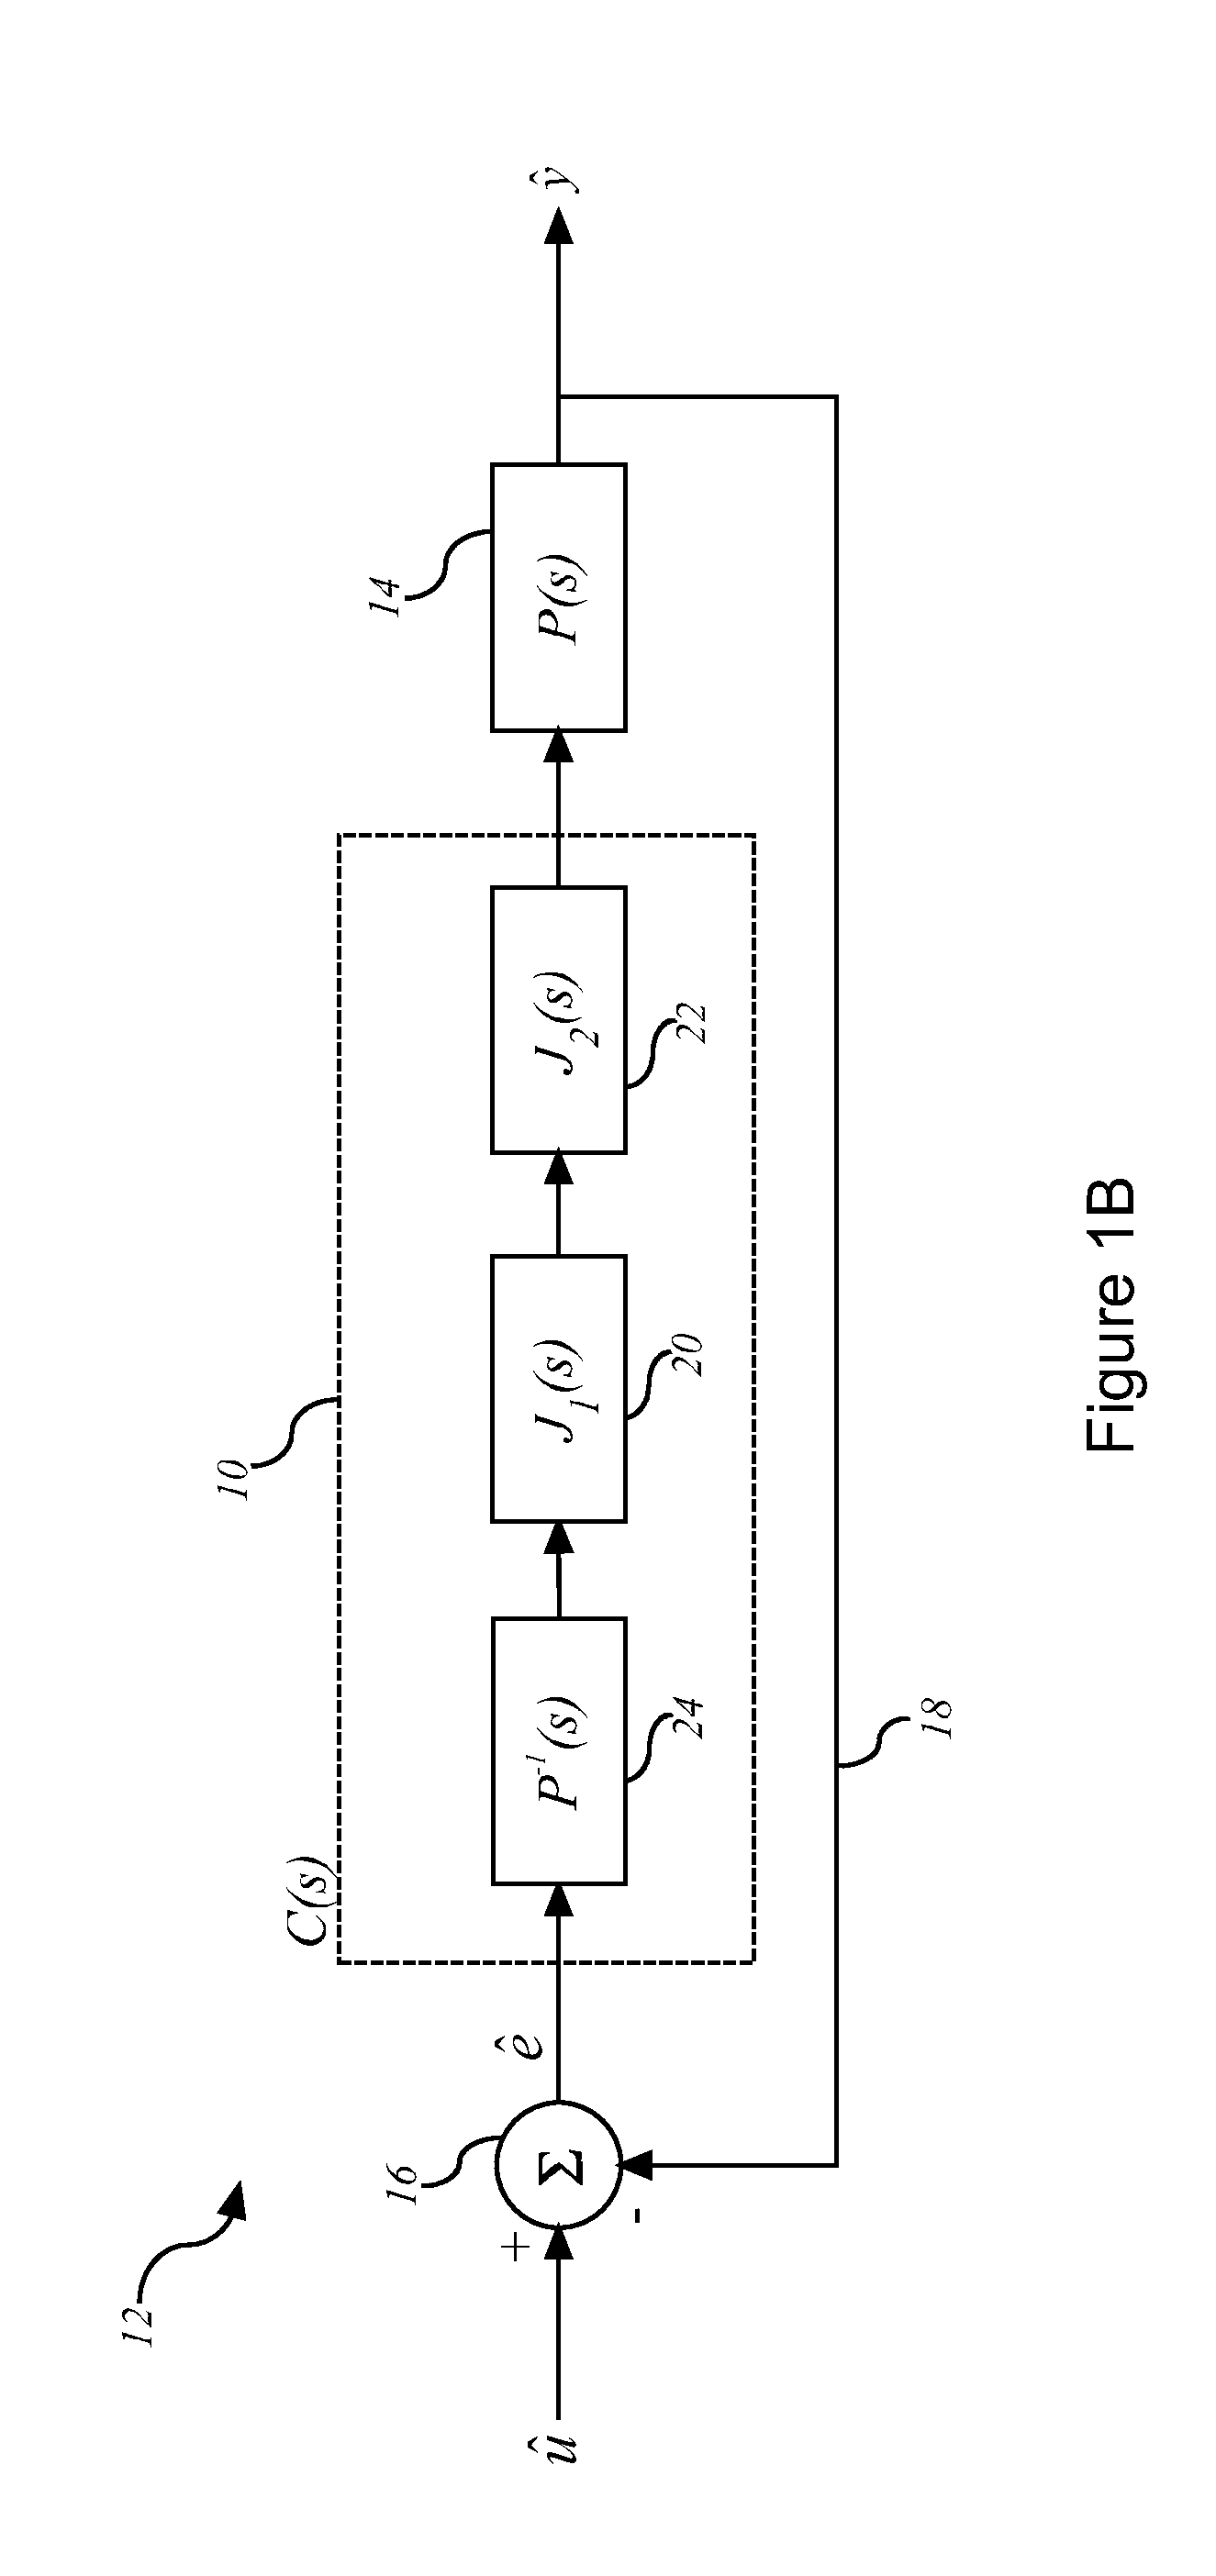 System and method for feedback control